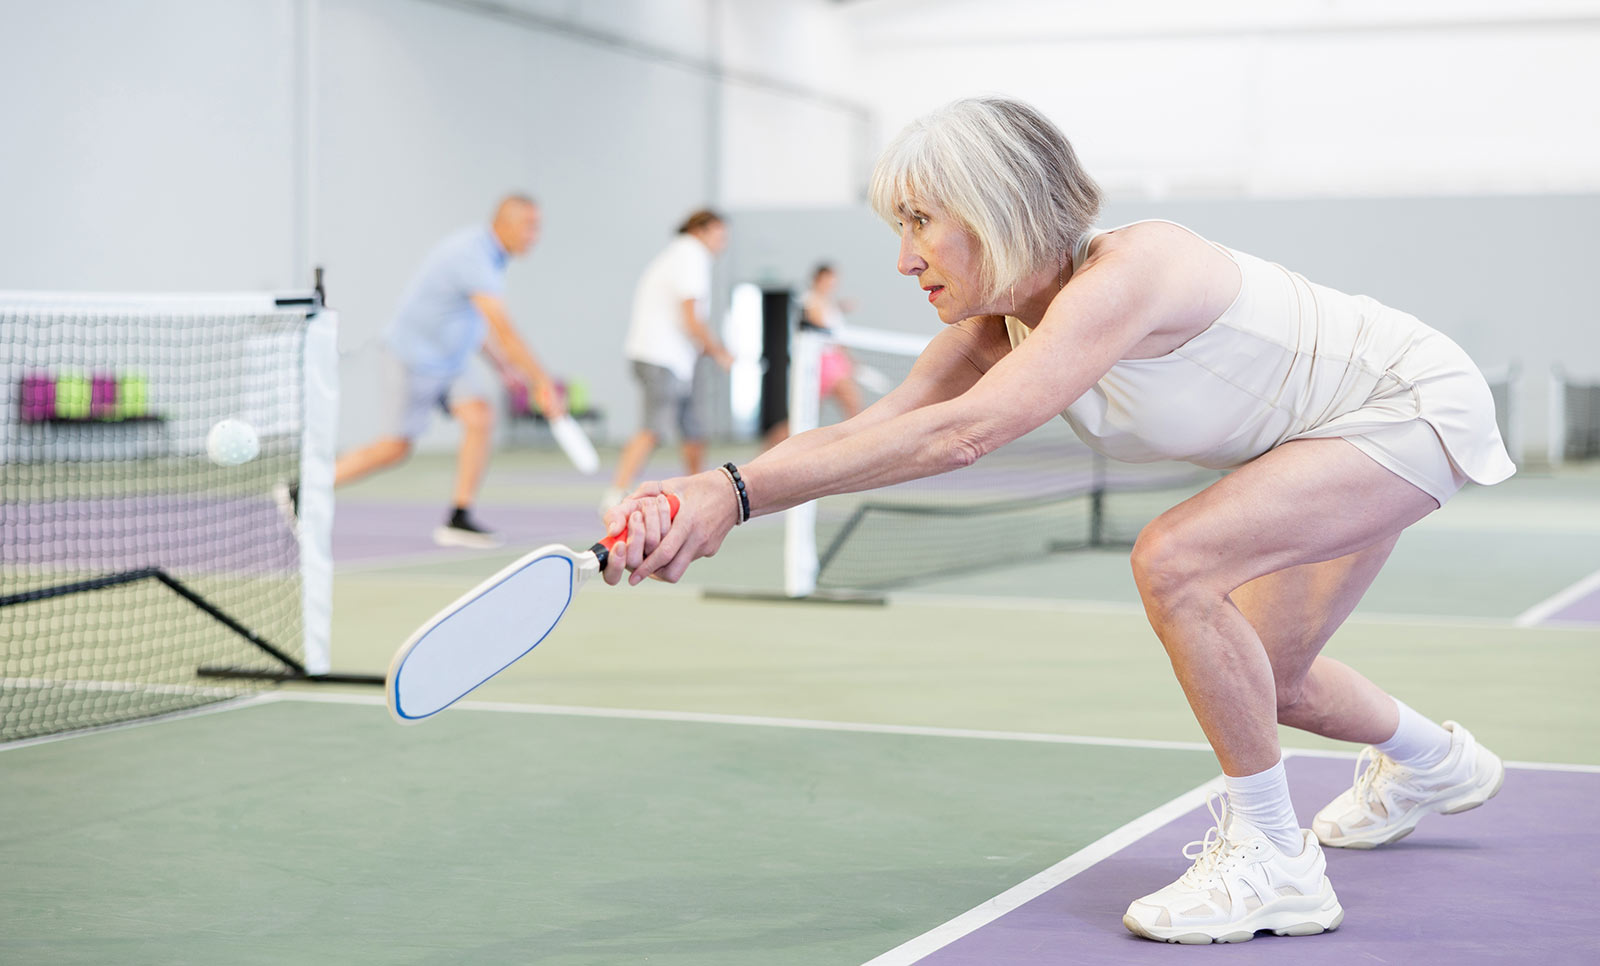 Strength Training for Pickleball Performance and Injury Prevention